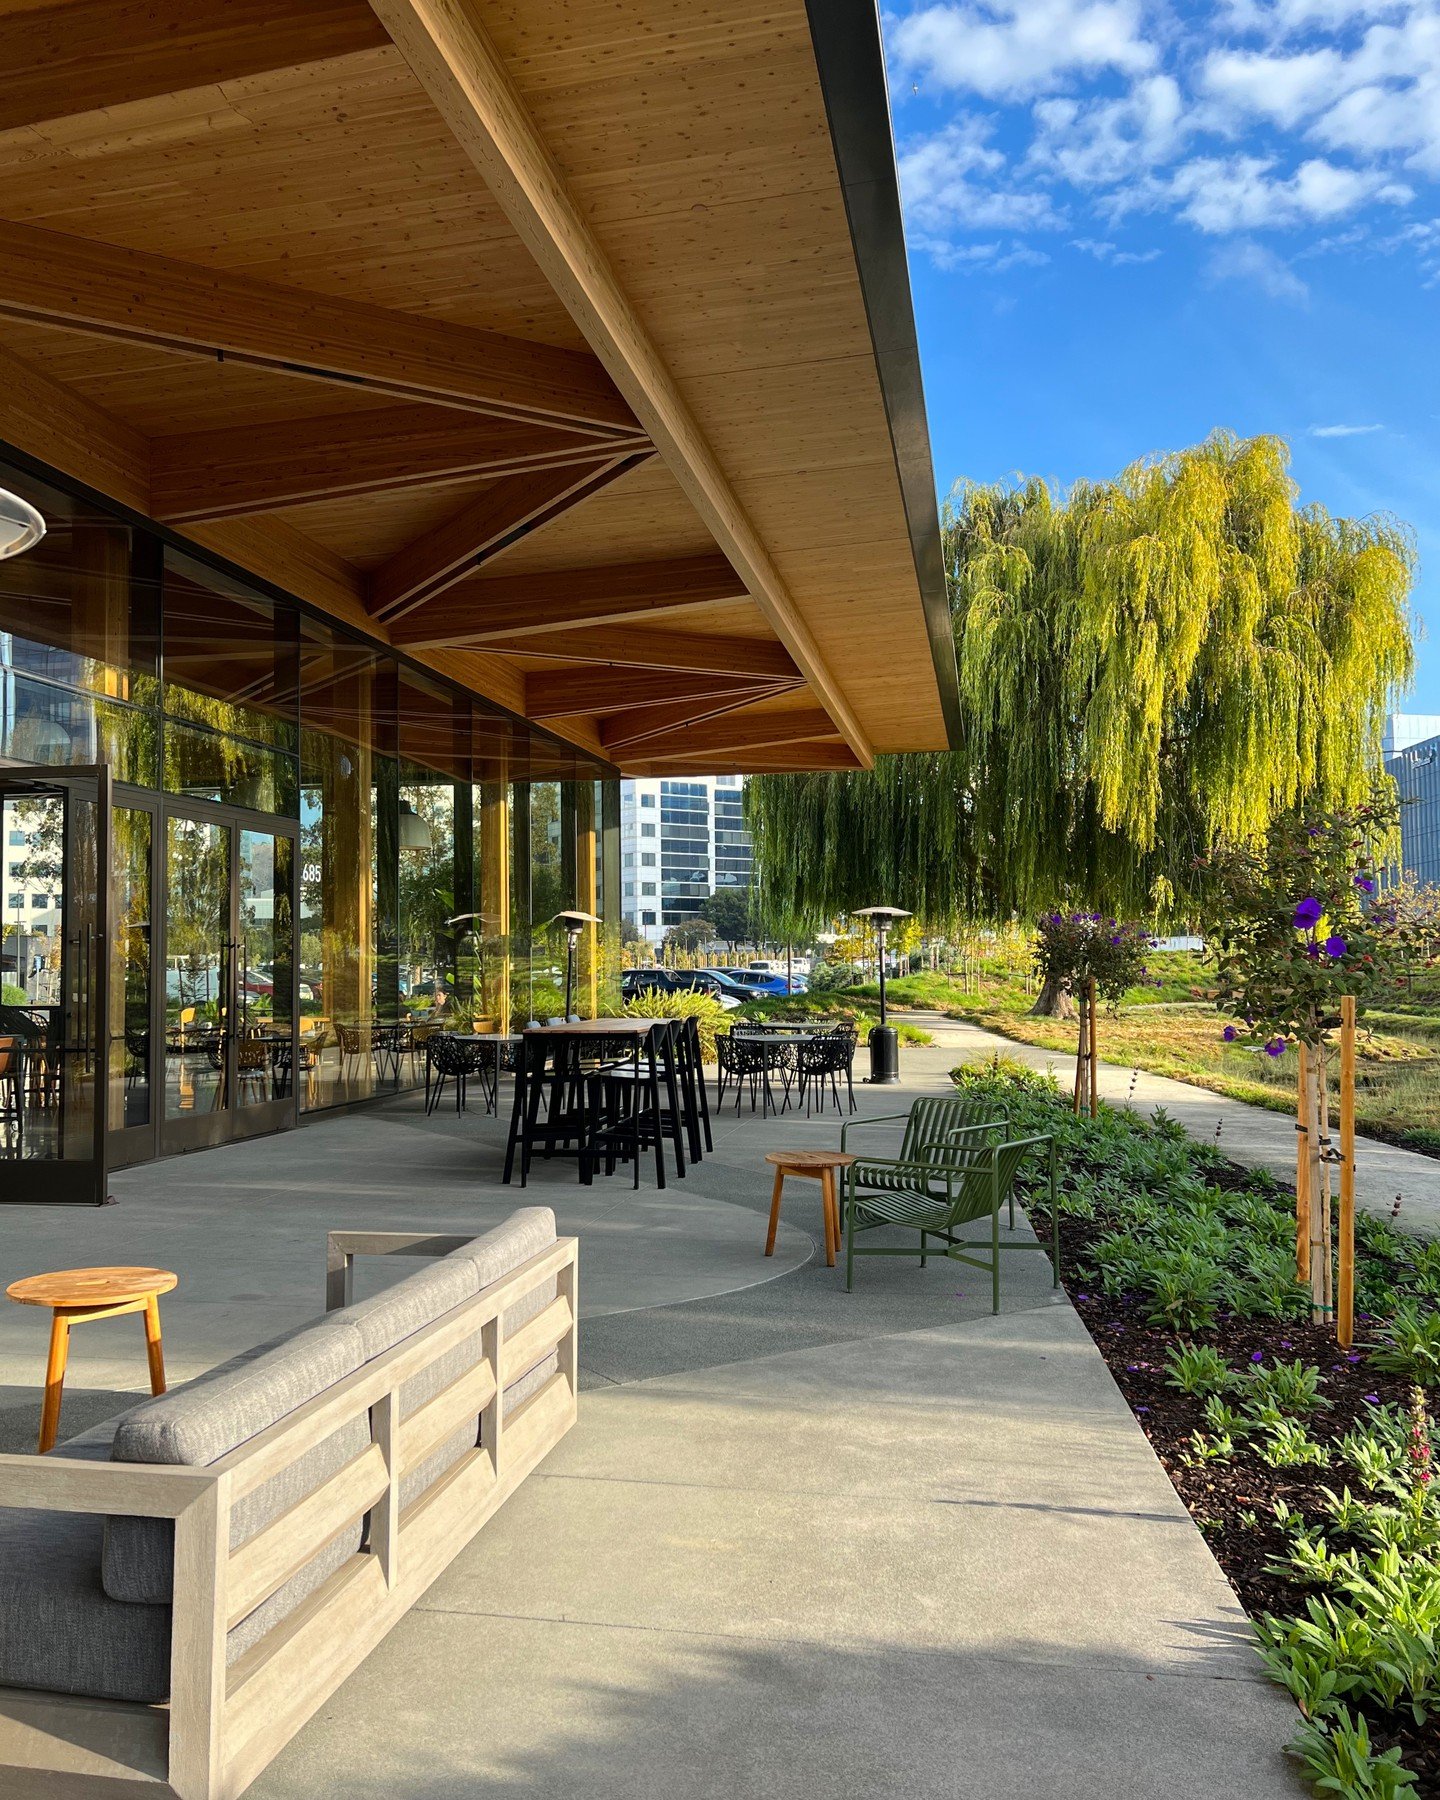 Step outside and elevate your happy hour or reception experience on our stunning patio. With a picturesque backdrop, delicious food, and top-notch service, your event will be one to remember. 

Book now and make unforgettable memories in this beautif